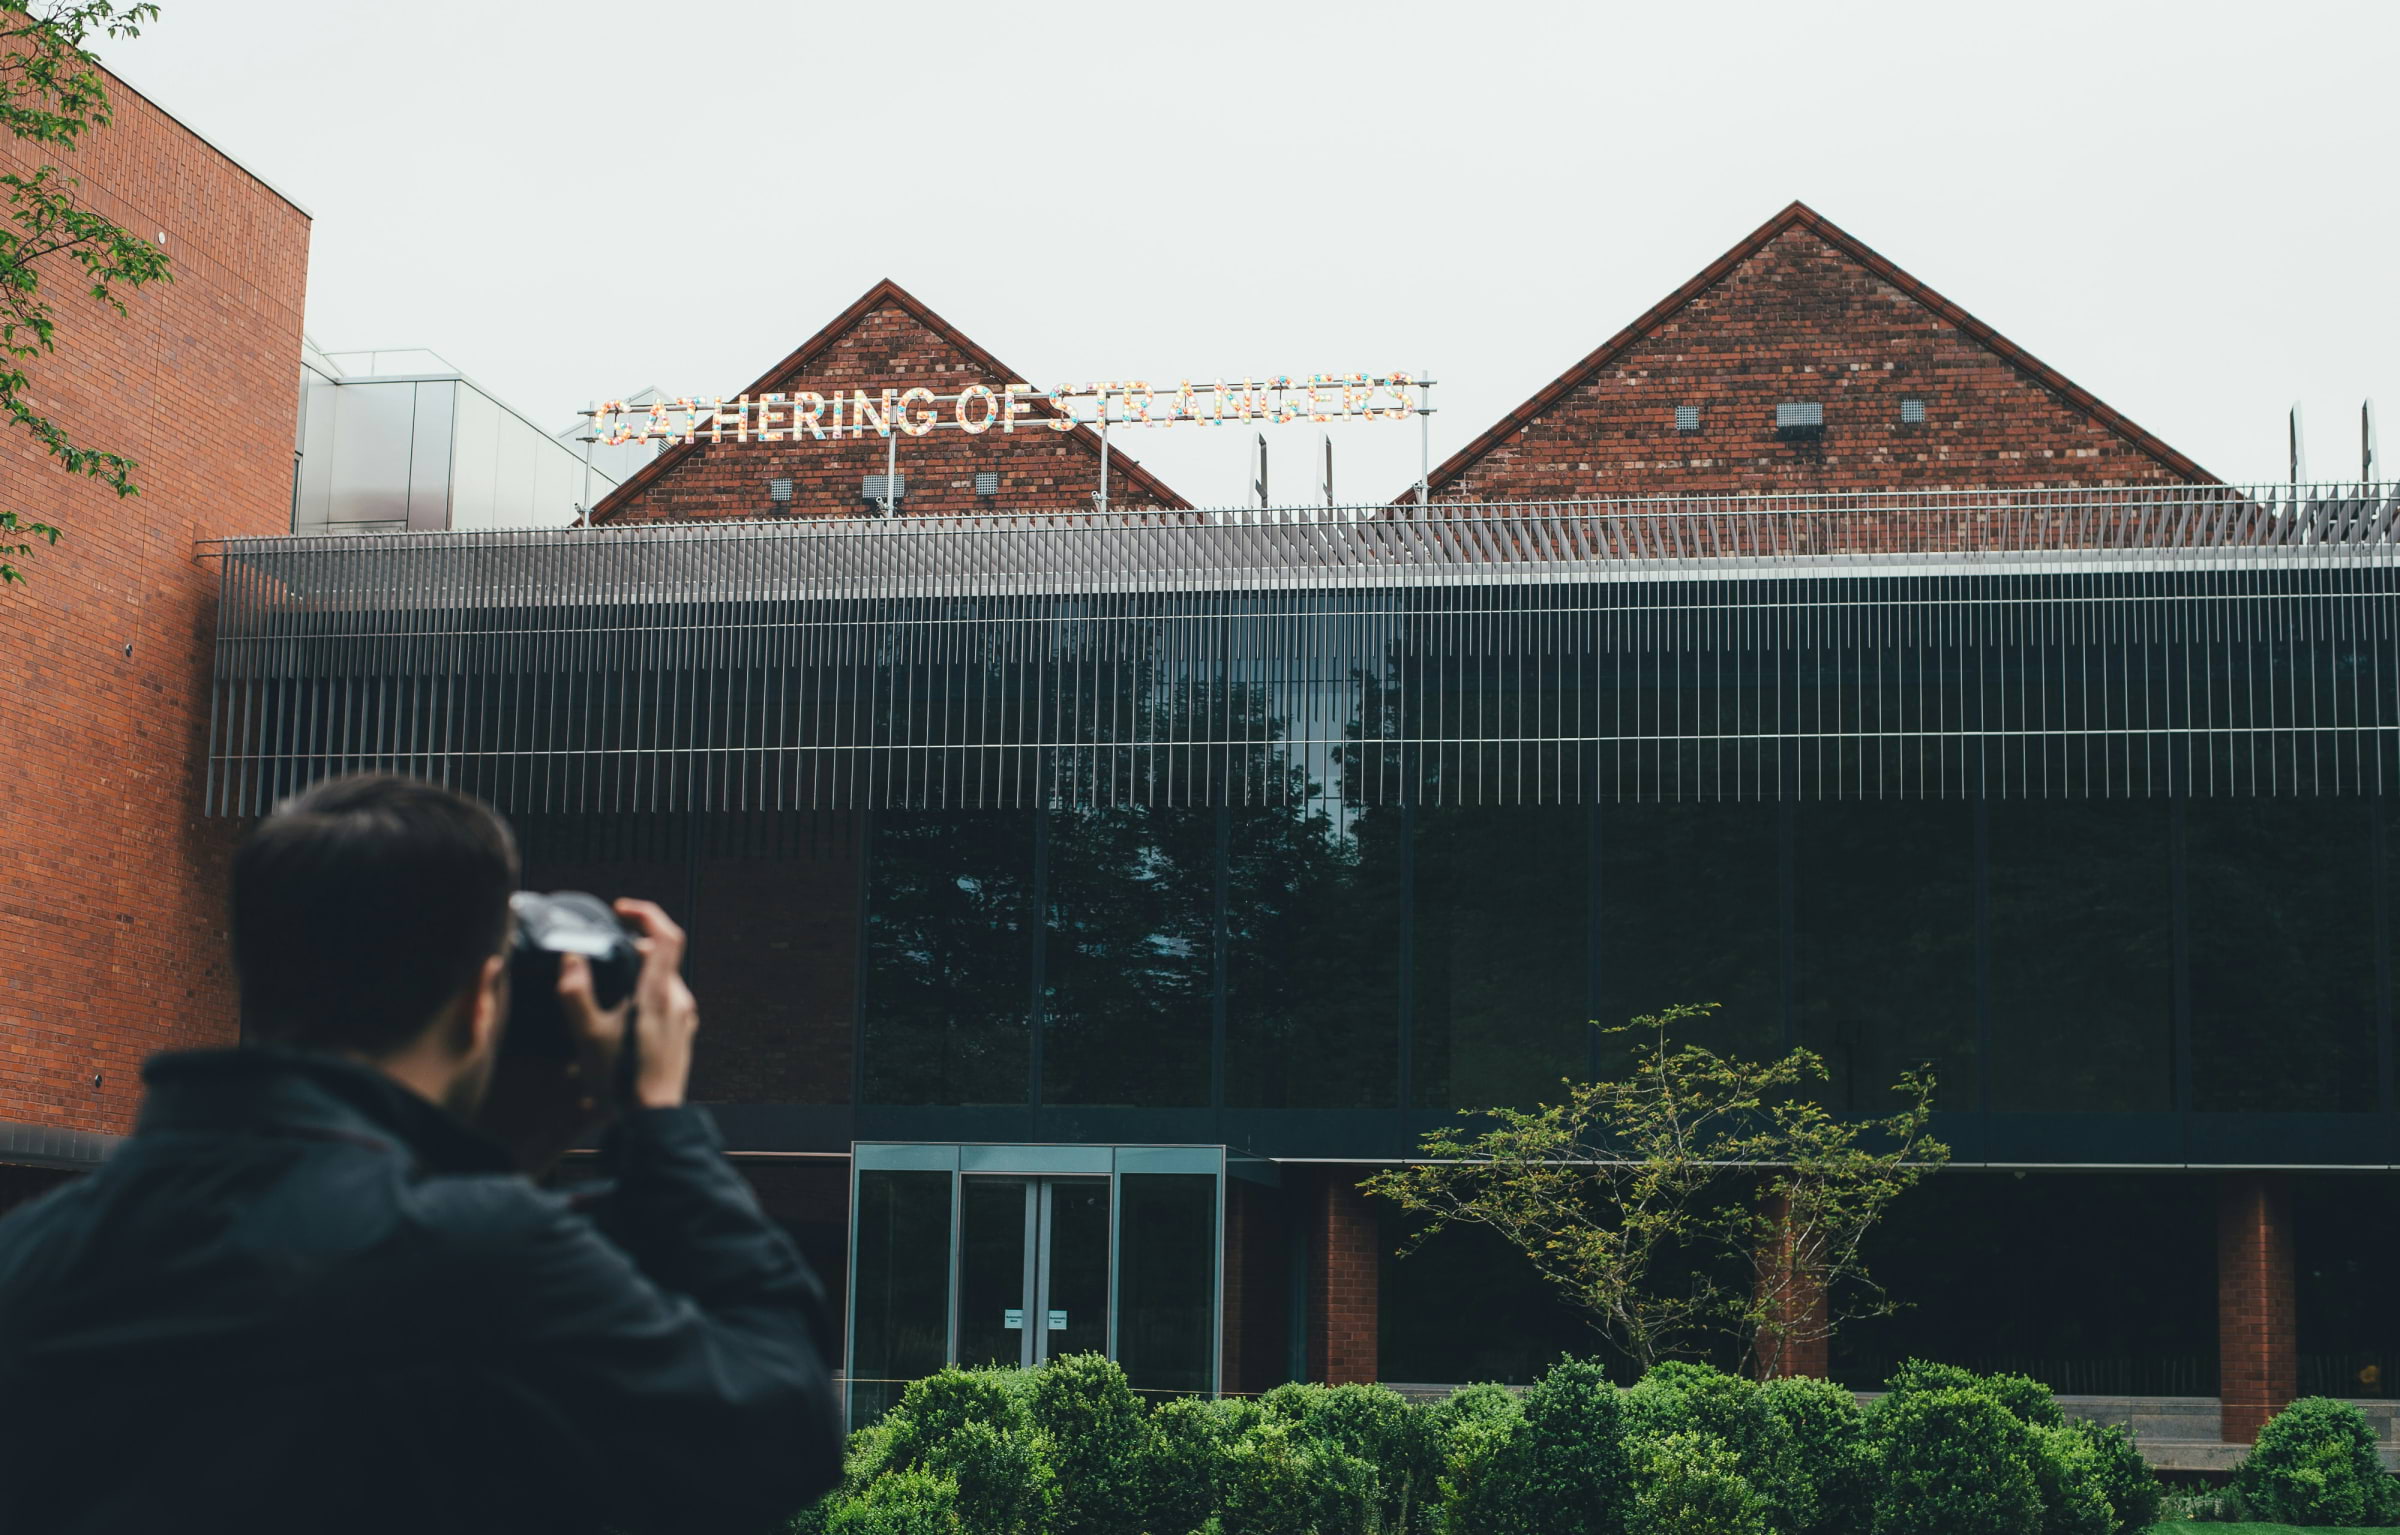 Someone taking a photo of the Whitworth Gallery in Manchester